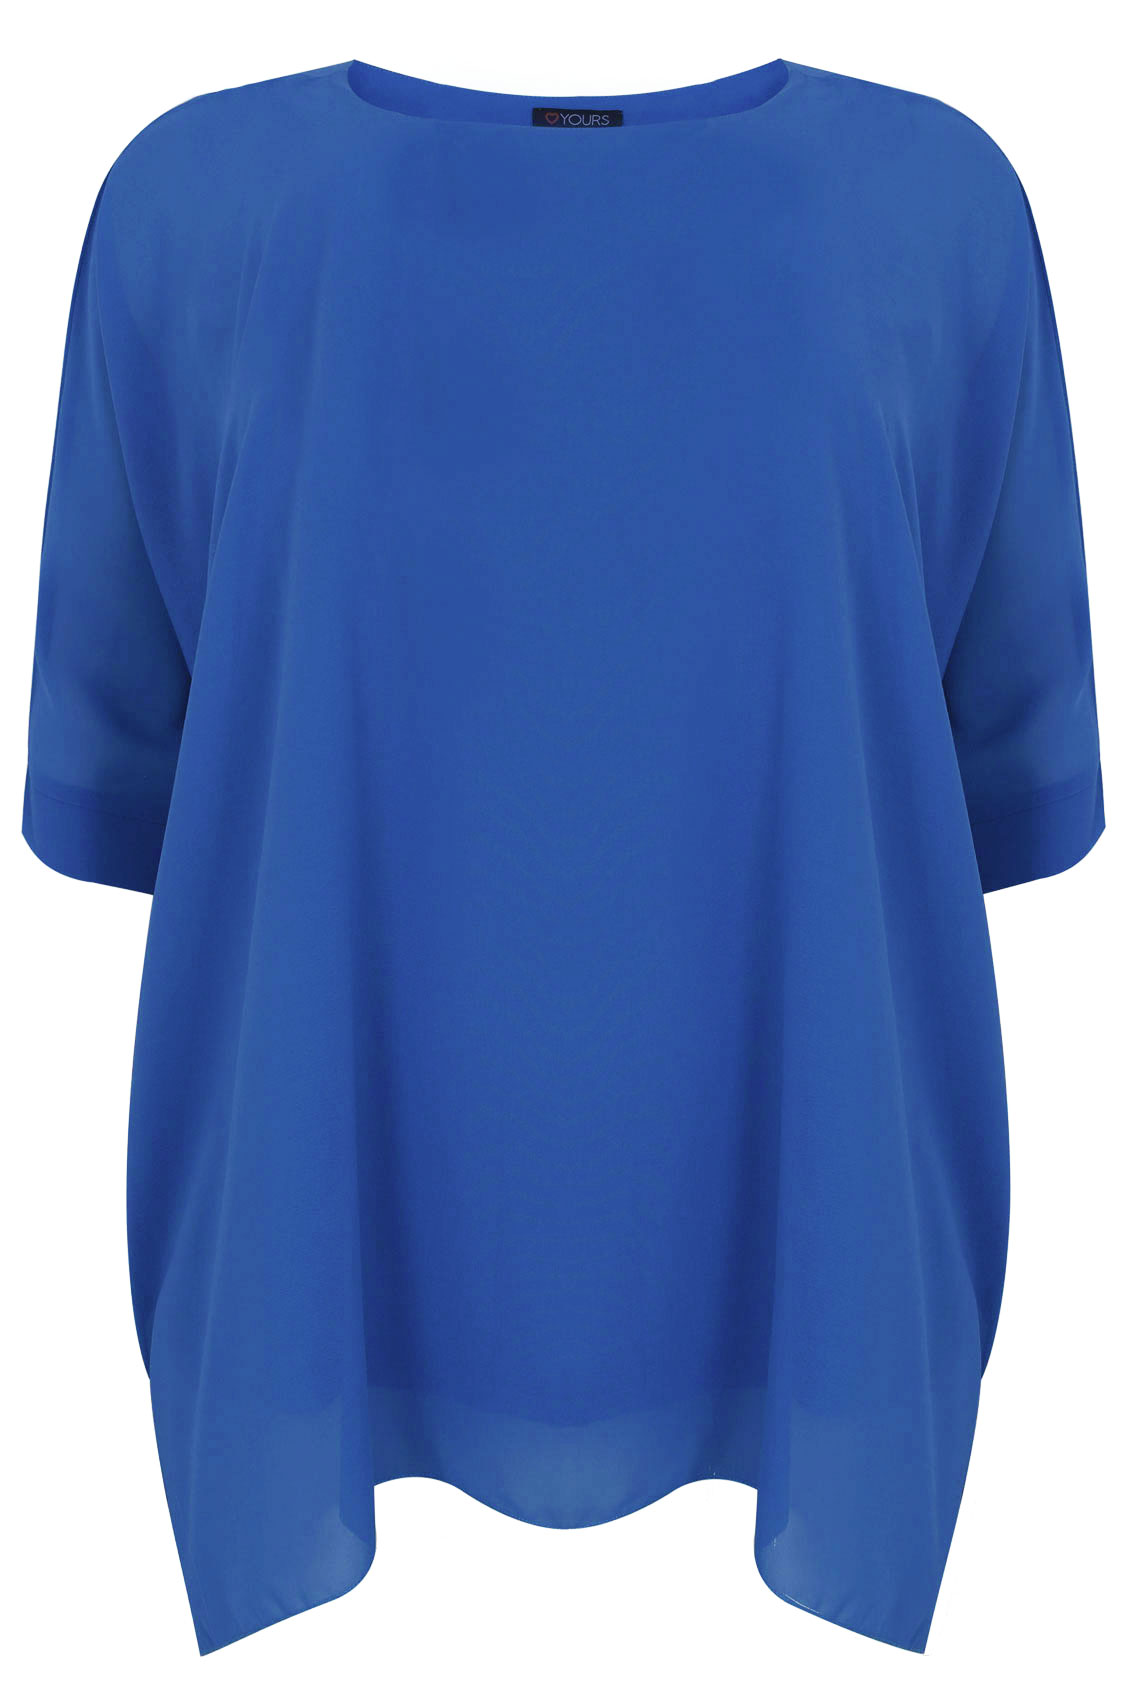 Blue Batwing Sleeve Chiffon Top With Necklace Plus size 16,18,20,22,24 ...